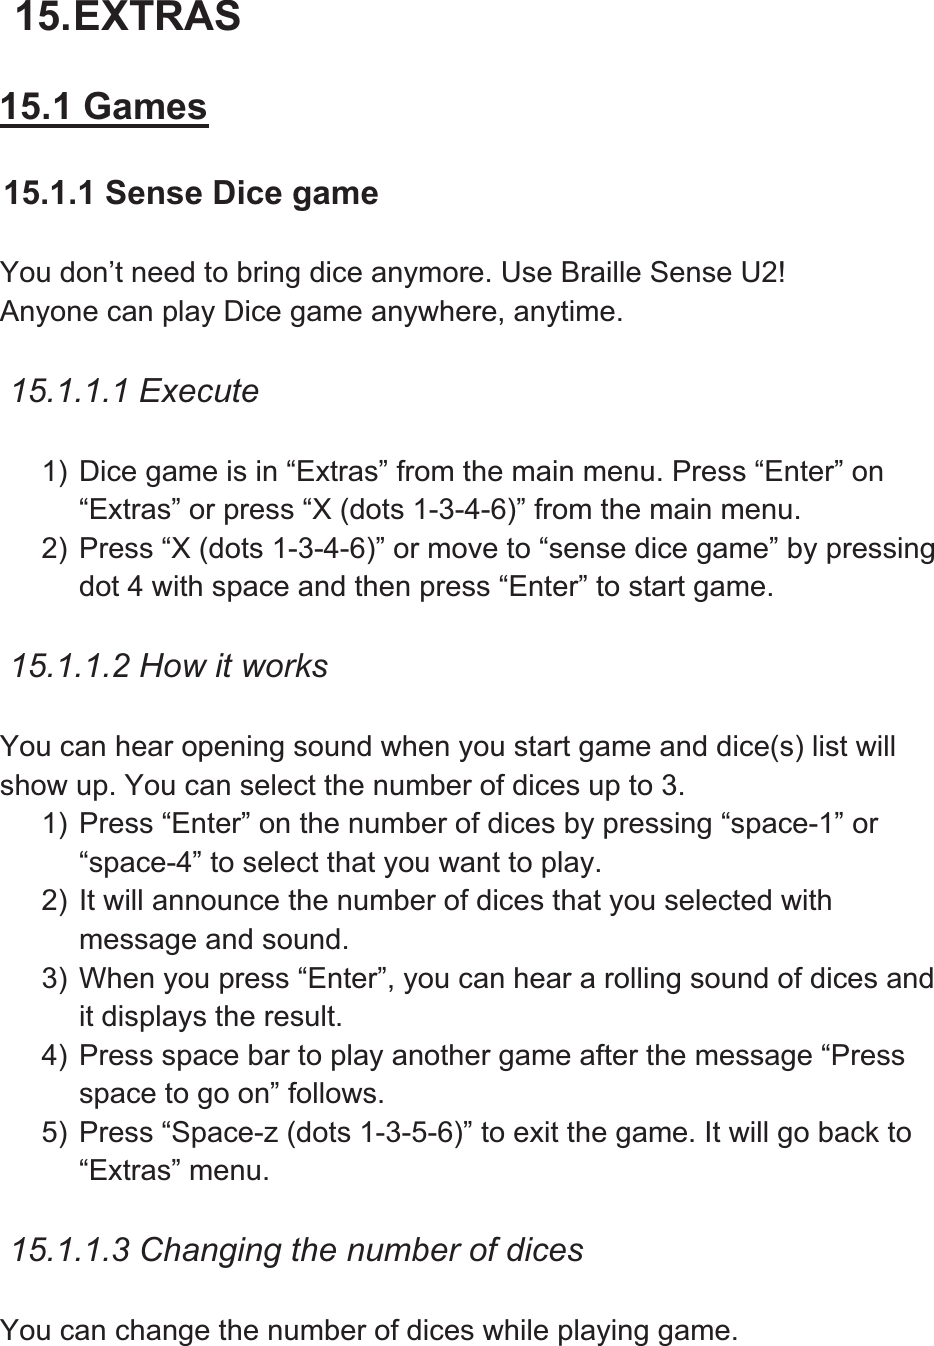 15. EXTRAS 15.1 Games15.1.1 Sense Dice game You don’t need to bring dice anymore. Use Braille Sense U2! Anyone can play Dice game anywhere, anytime.   15.1.1.1 Execute 1) Dice game is in “Extras” from the main menu. Press “Enter” on “Extras” or press “X (dots 1-3-4-6)” from the main menu.   2) Press “X (dots 1-3-4-6)” or move to “sense dice game” by pressing dot 4 with space and then press “Enter” to start game. 15.1.1.2 How it works You can hear opening sound when you start game and dice(s) list will show up. You can select the number of dices up to 3. 1) Press “Enter” on the number of dices by pressing “space-1” or “space-4” to select that you want to play. 2) It will announce the number of dices that you selected with message and sound.   3) When you press “Enter”, you can hear a rolling sound of dices and it displays the result. 4) Press space bar to play another game after the message “Press space to go on” follows.   5) Press “Space-z (dots 1-3-5-6)” to exit the game. It will go back to “Extras” menu.   15.1.1.3 Changing the number of dices You can change the number of dices while playing game.   